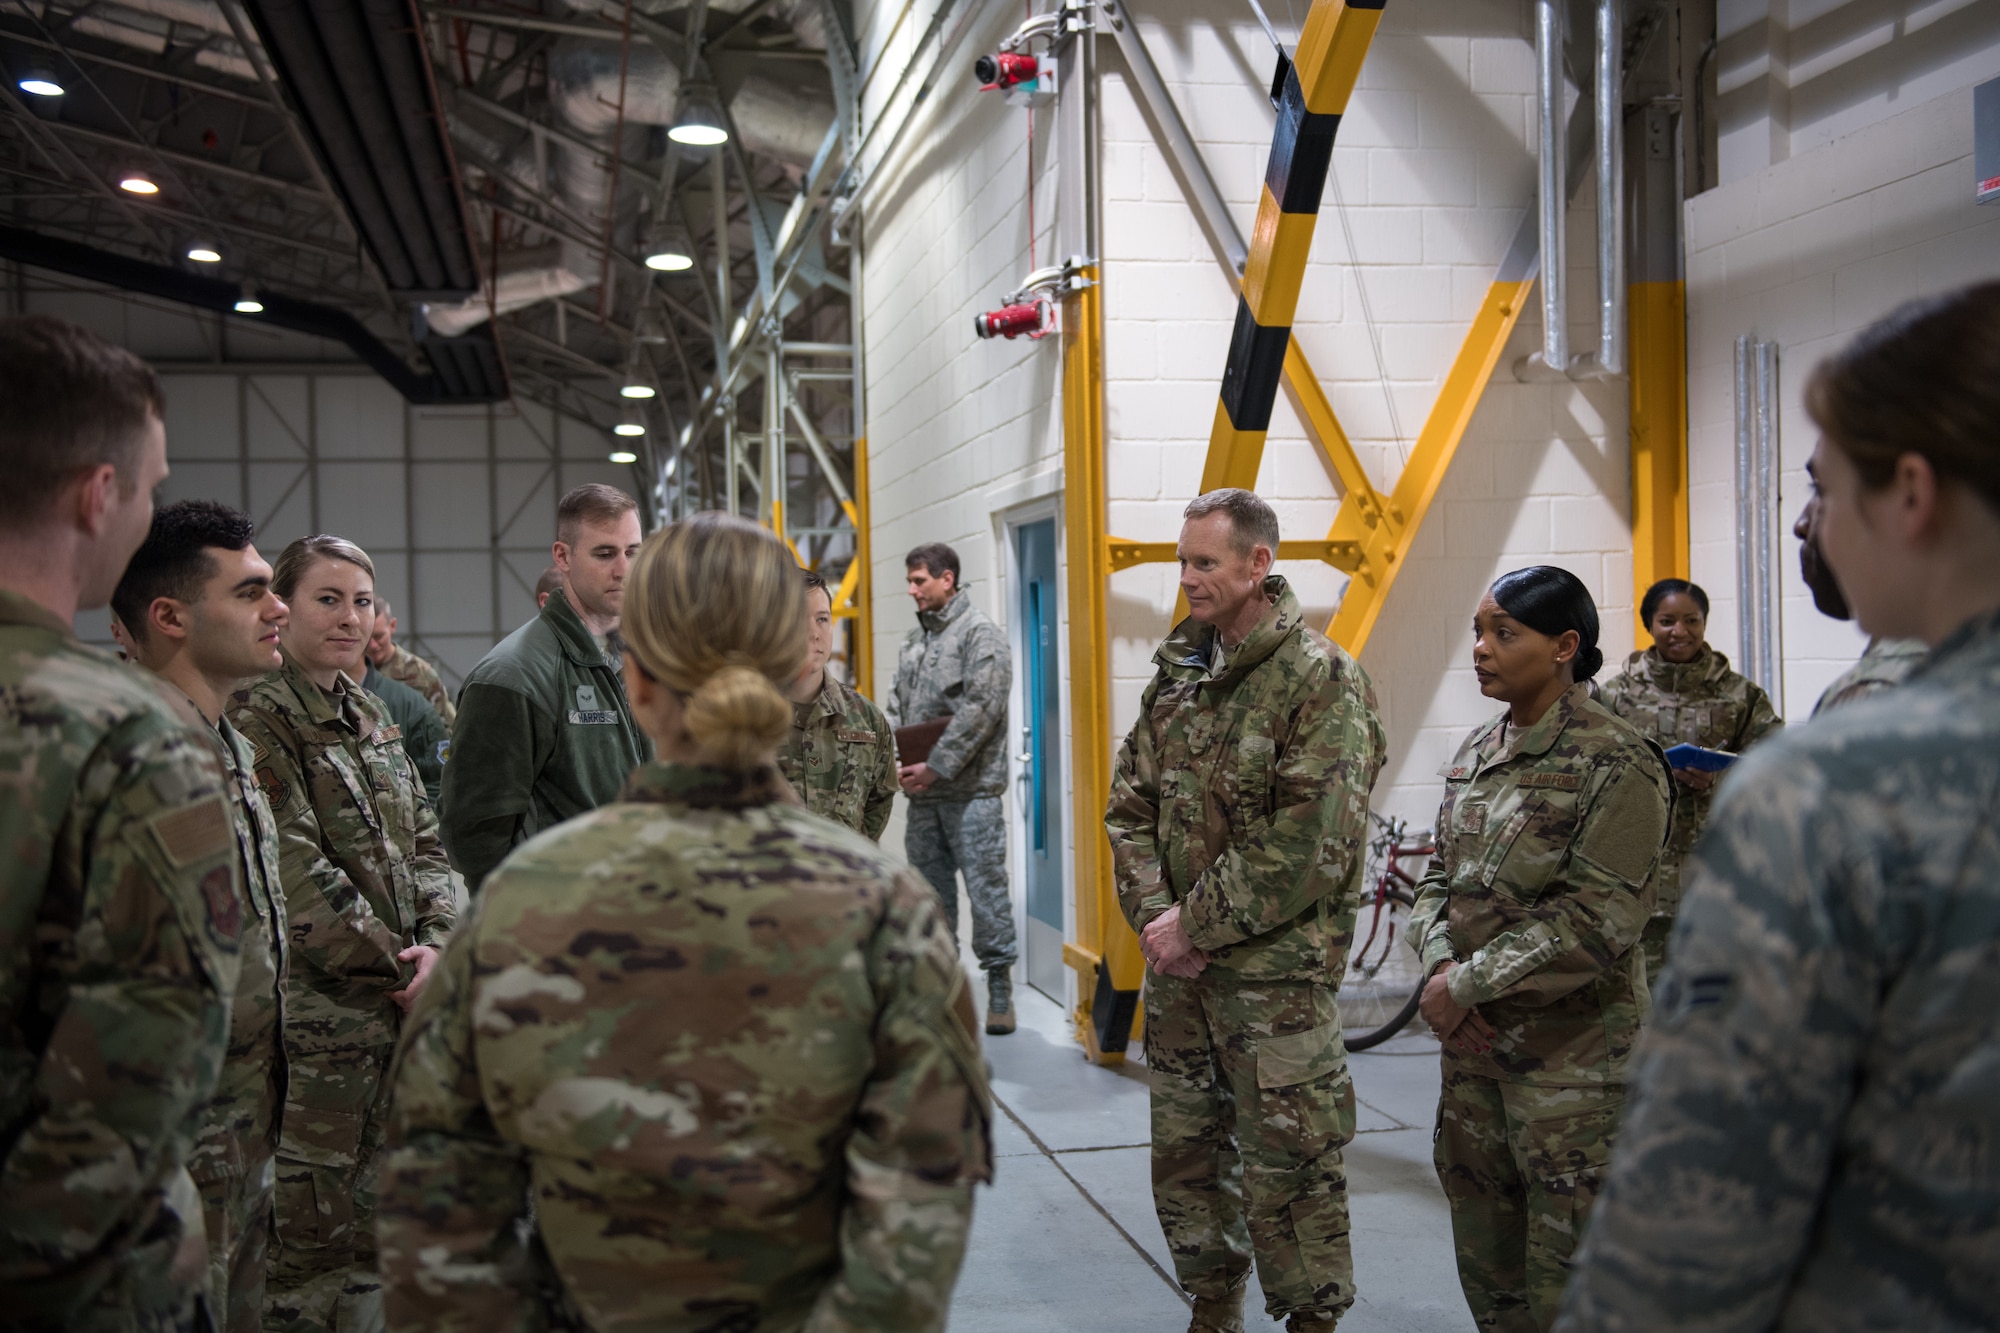 Airmen from the 2nd Operations Support Squadron deployed from Barksdale Air Force Base, La., brief Maj. Gen. James Dawkins Jr., Eighth Air Force and Joint-Global Strike Operations Center commander at RAF Fairford, England, April 4, 2019. The Airmen provided insights on how they successfully got their job done during the U.S. Strategic Command Bomber Task Force in Europe. (U.S. Air Force photo by Airman 1st Class Tessa B. Corrick)